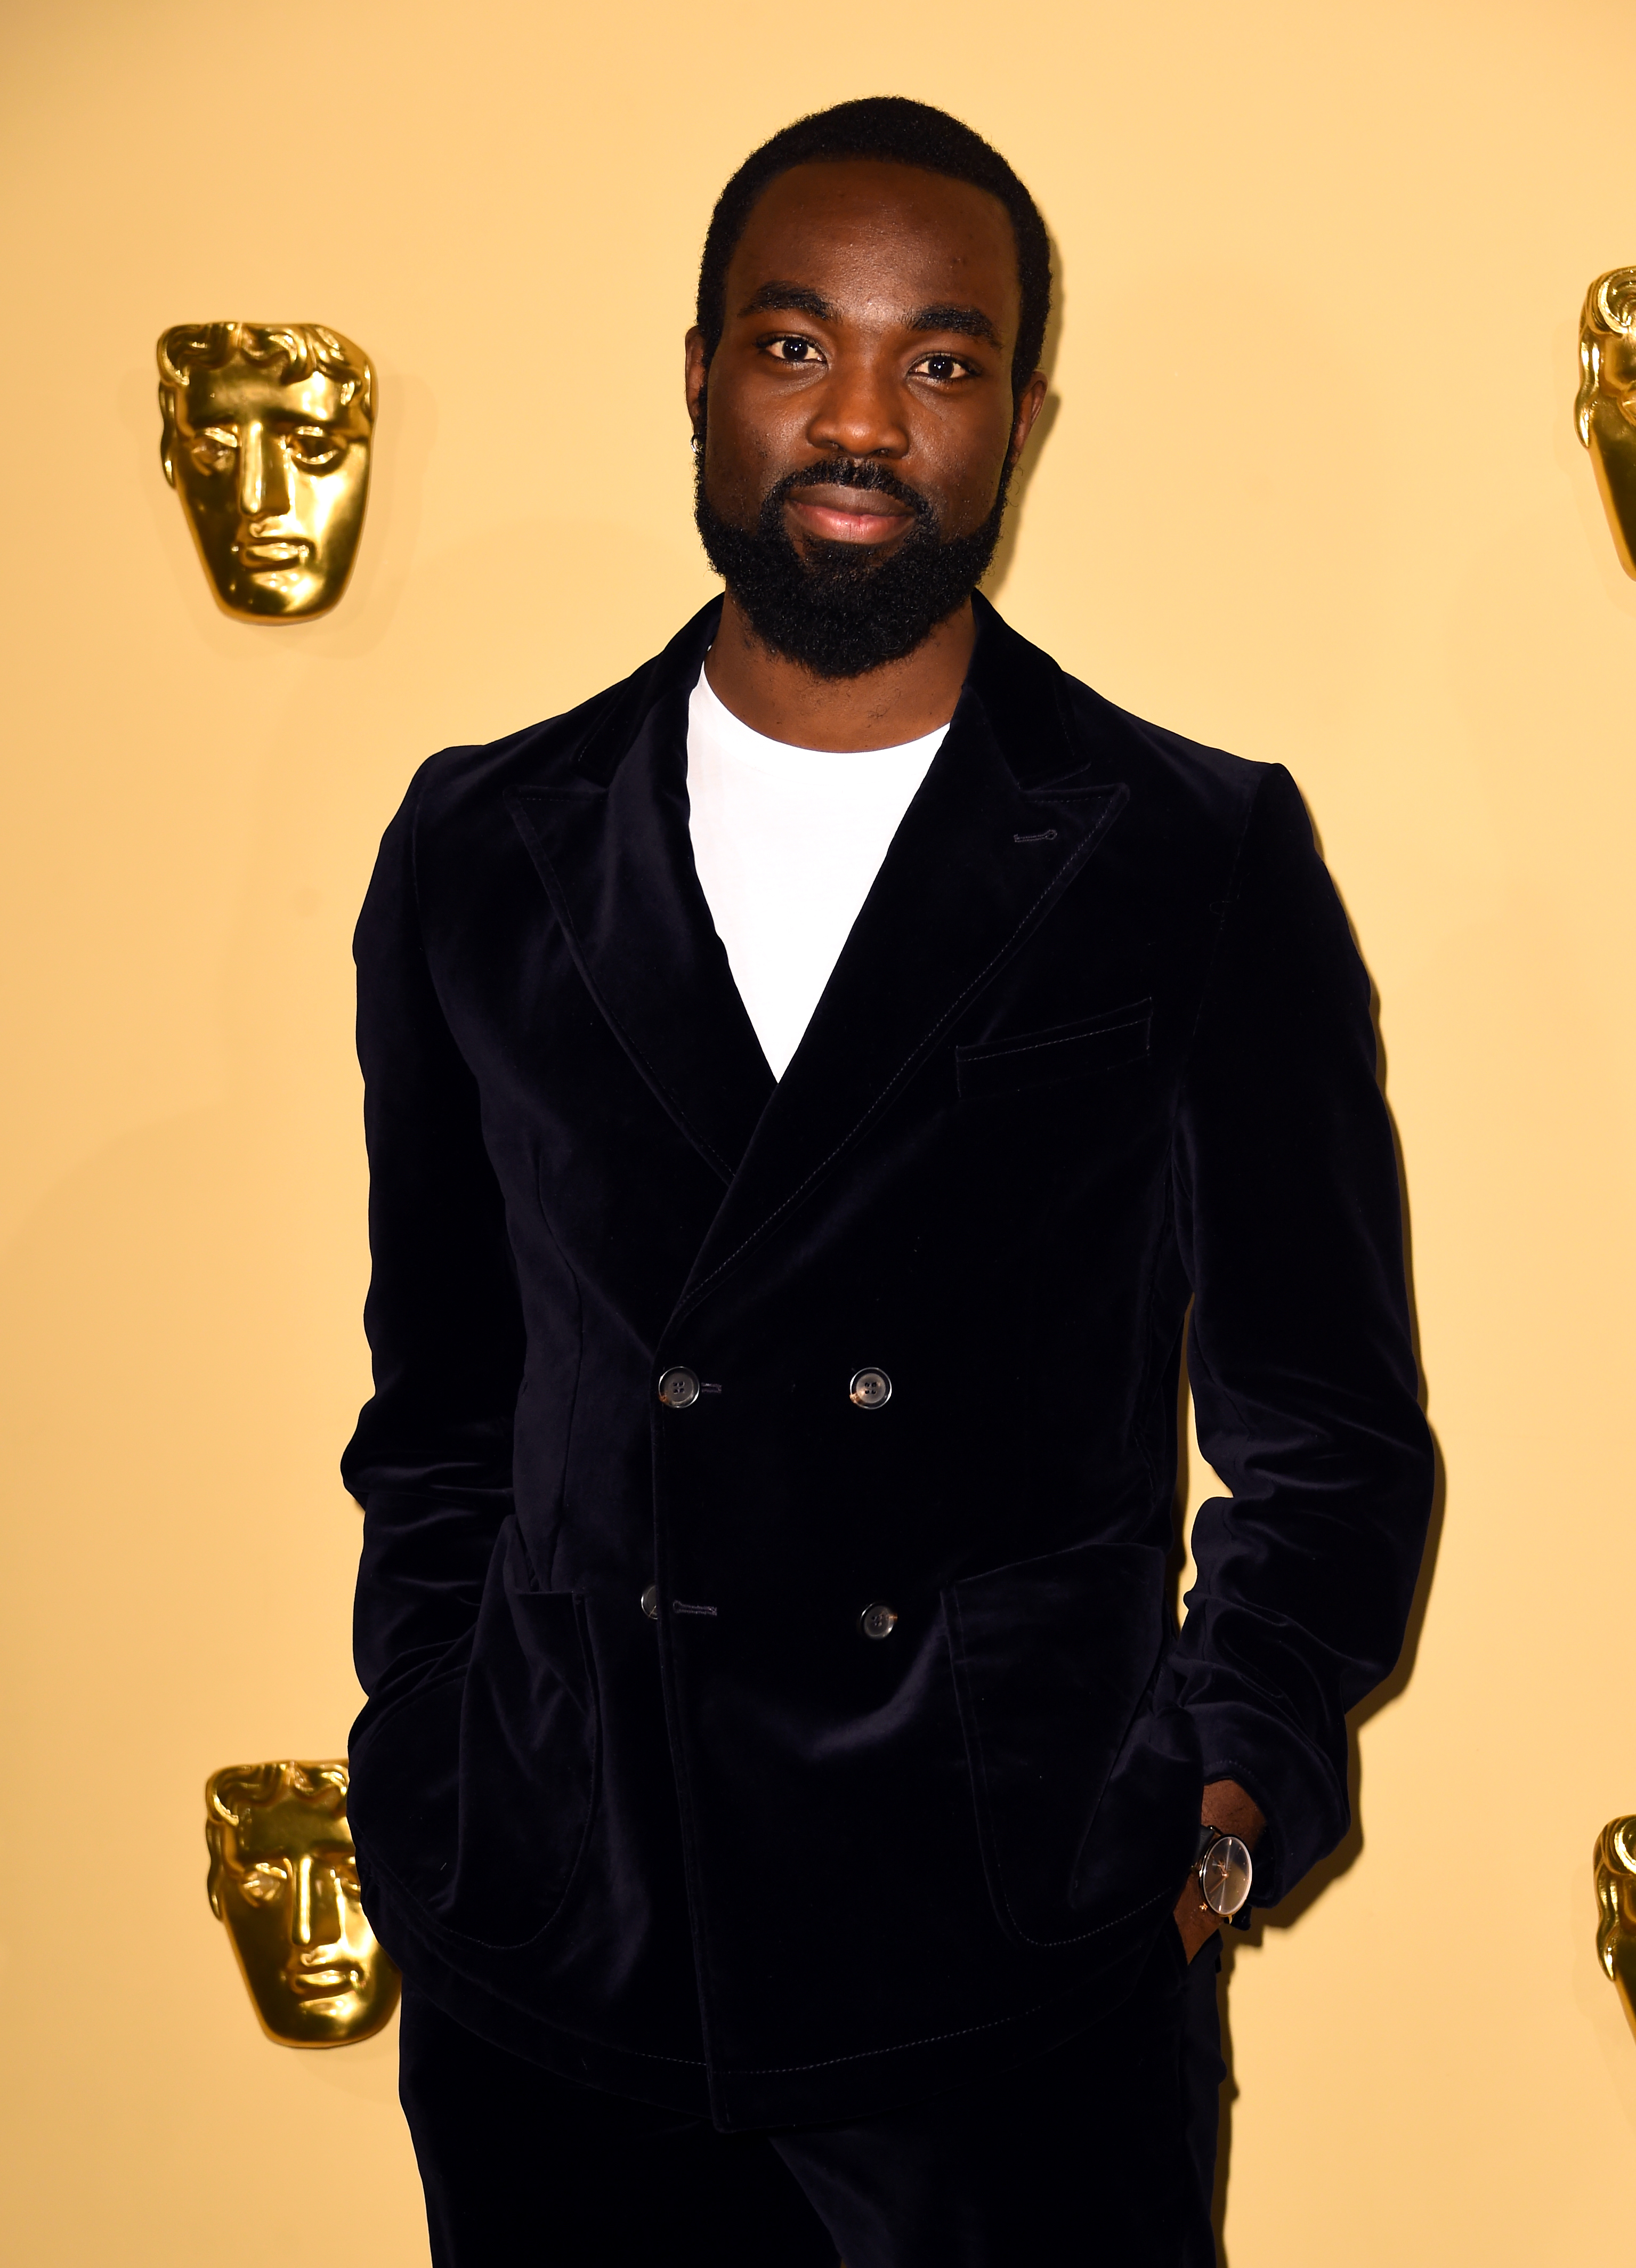 Paapa Essiedu poses at the BAFTA Breakthrough Brits 2018 celebration event in London, England | Source: Getty Images